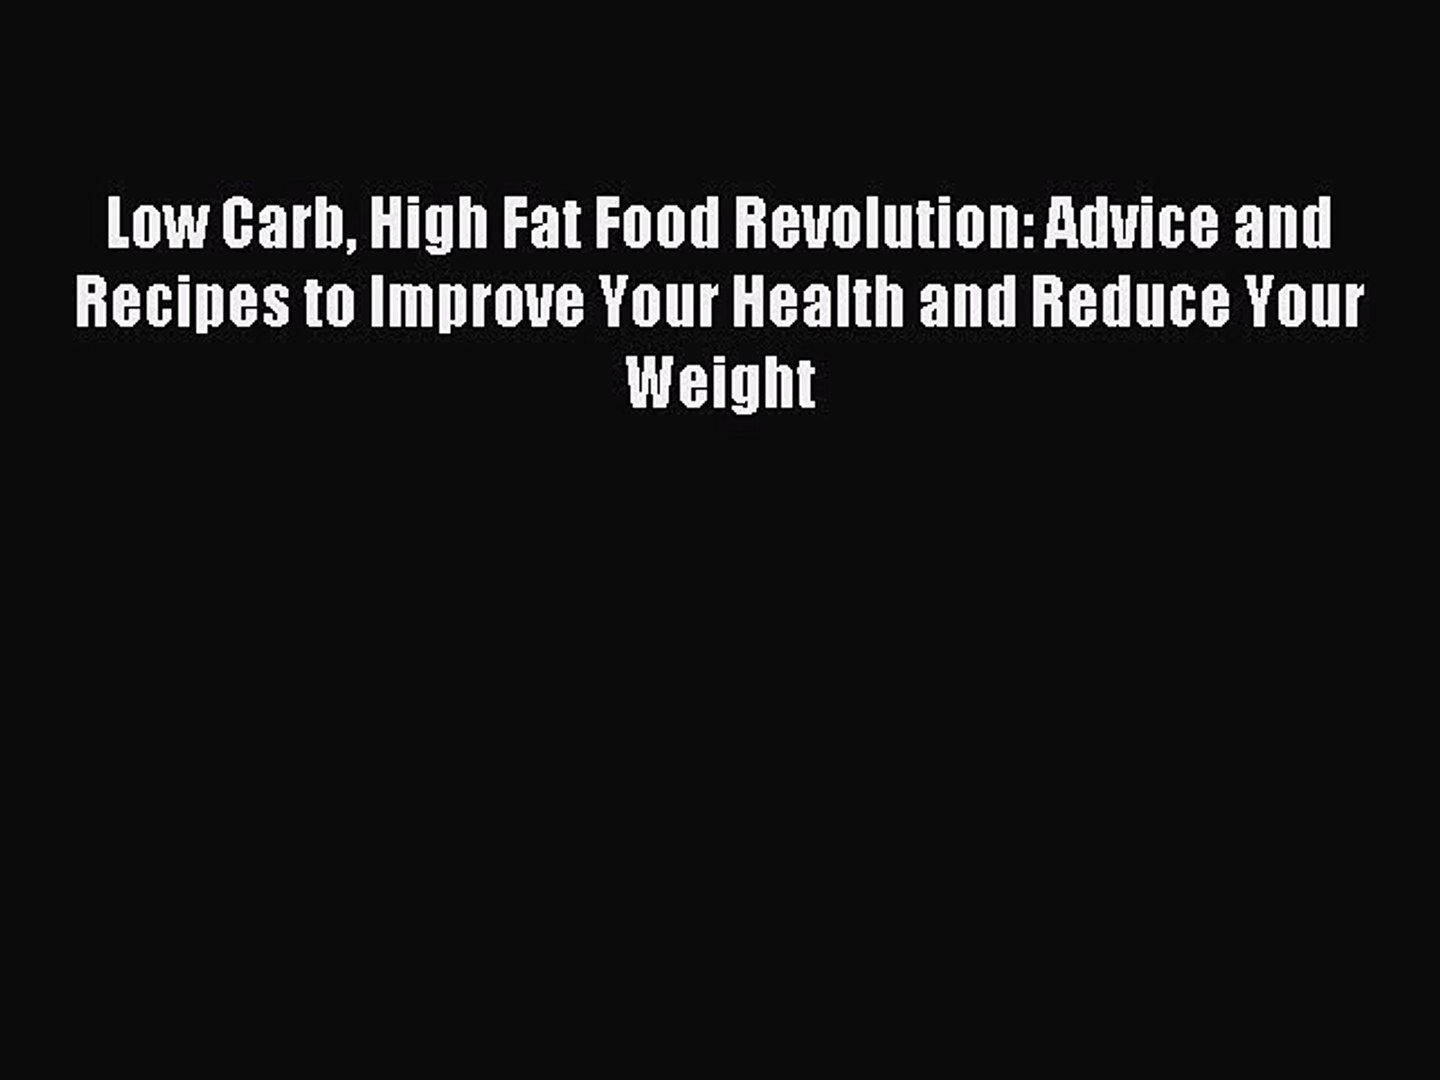 [PDF] Low Carb High Fat Food Revolution: Advice and Recipes to Improve Your Health and Reduce